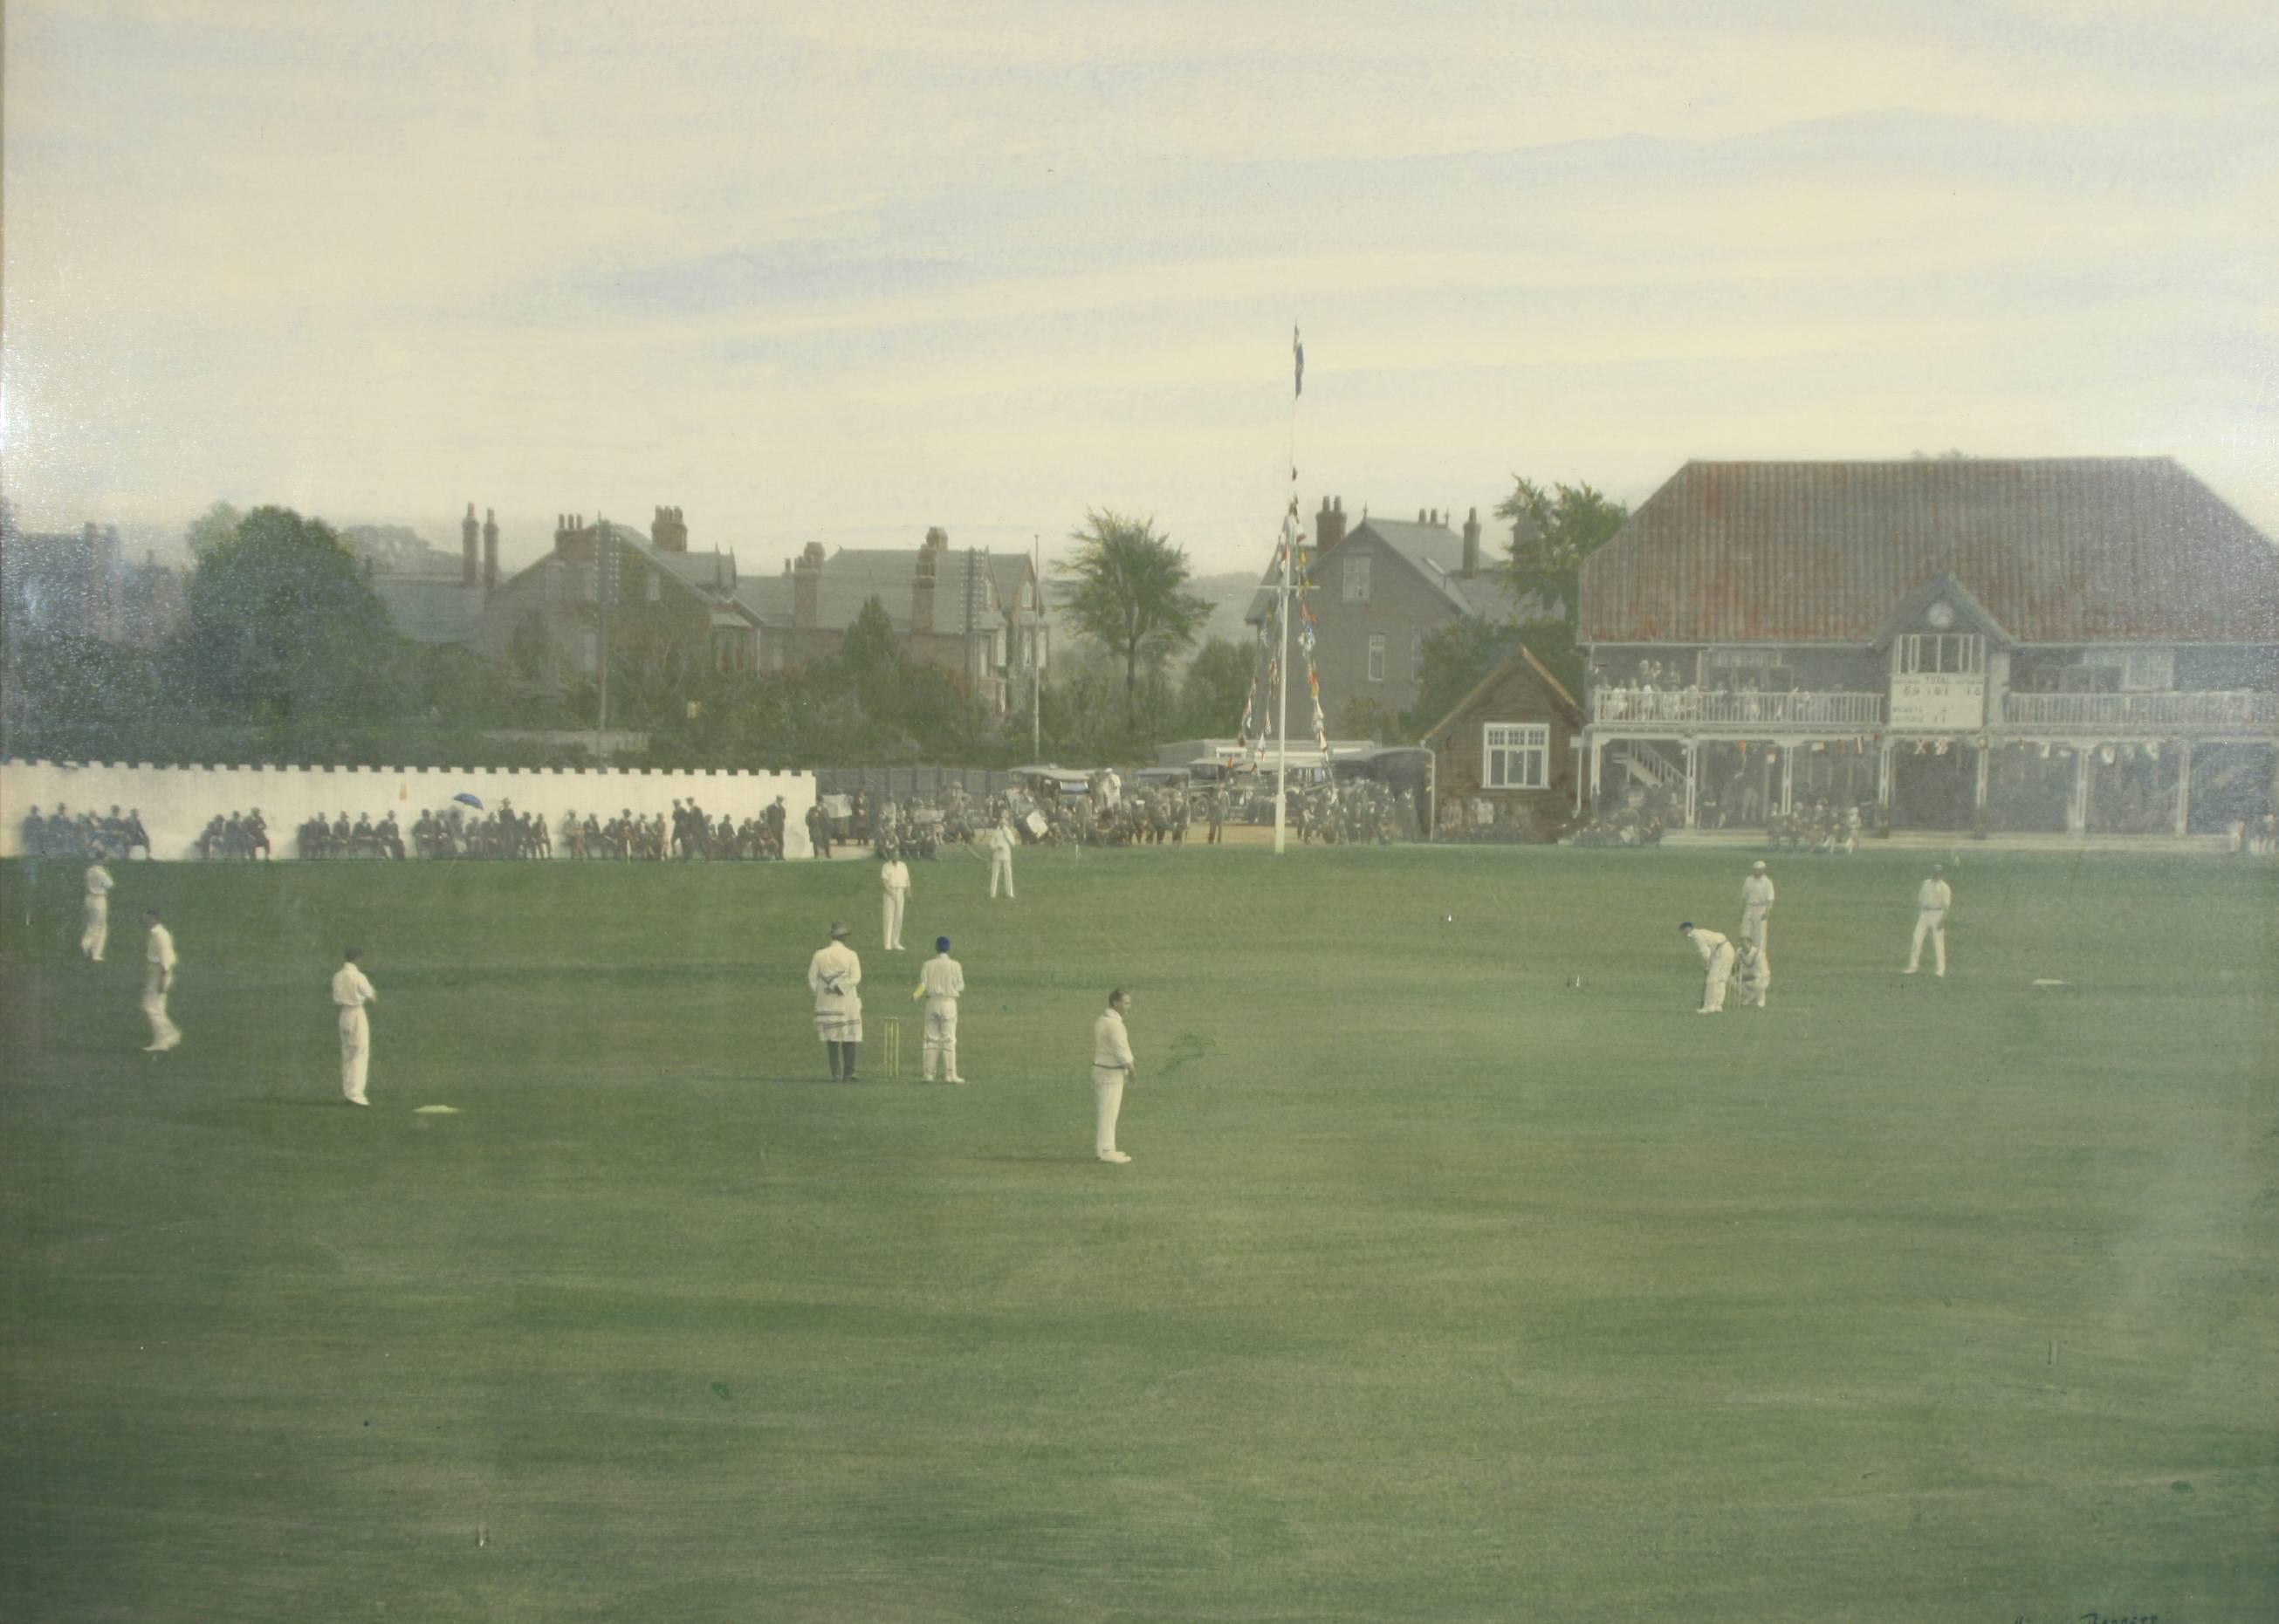 Vintage hand colored cricketing photograph.
A fine hand colored photograph of Chelmsford cricket ground.
This is a hand colored photograph by Howard Barrett, 1926.
Framed in a good carved wood and gilded frame.

Measures: Image size: 61 x